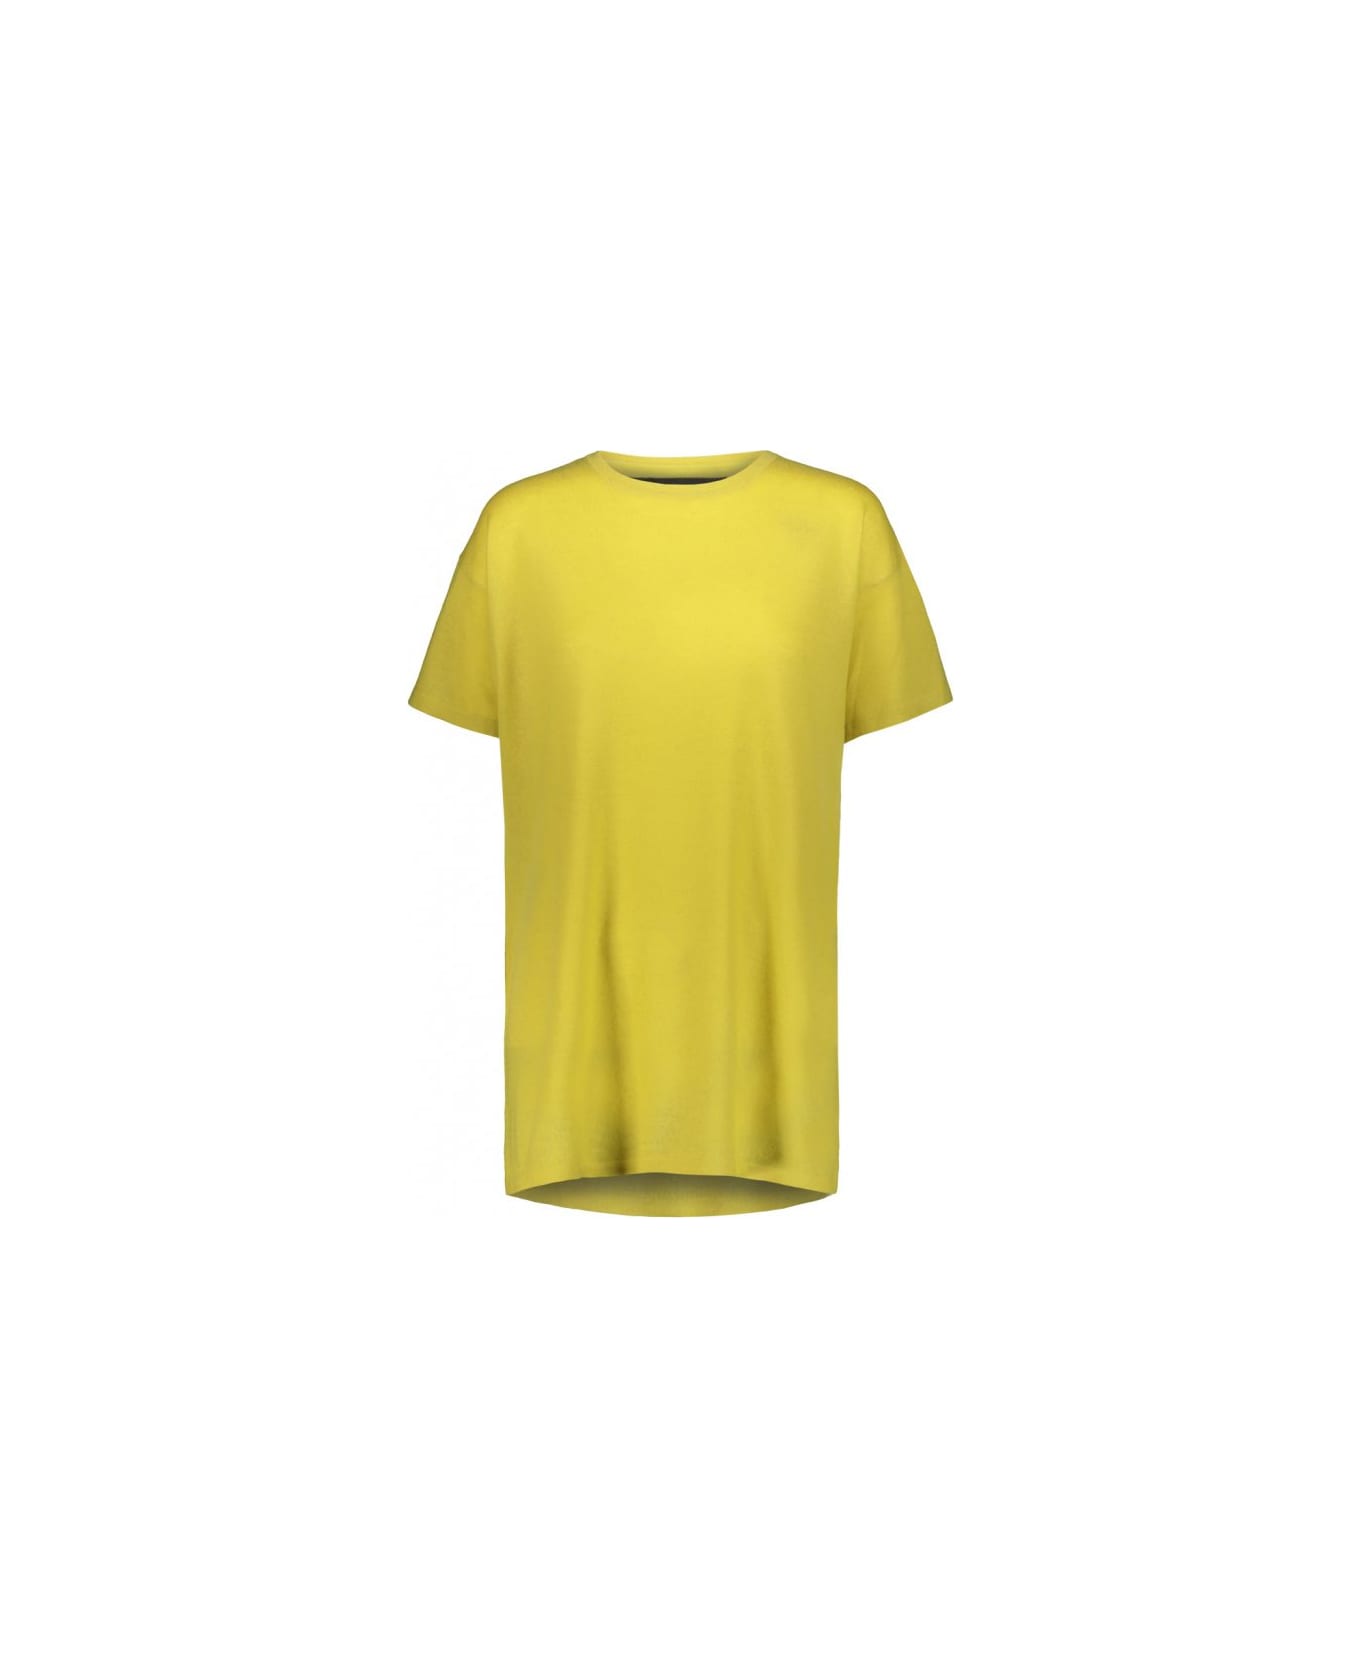 Frenckenberger Cashmere T-shirt - Celery Tシャツ